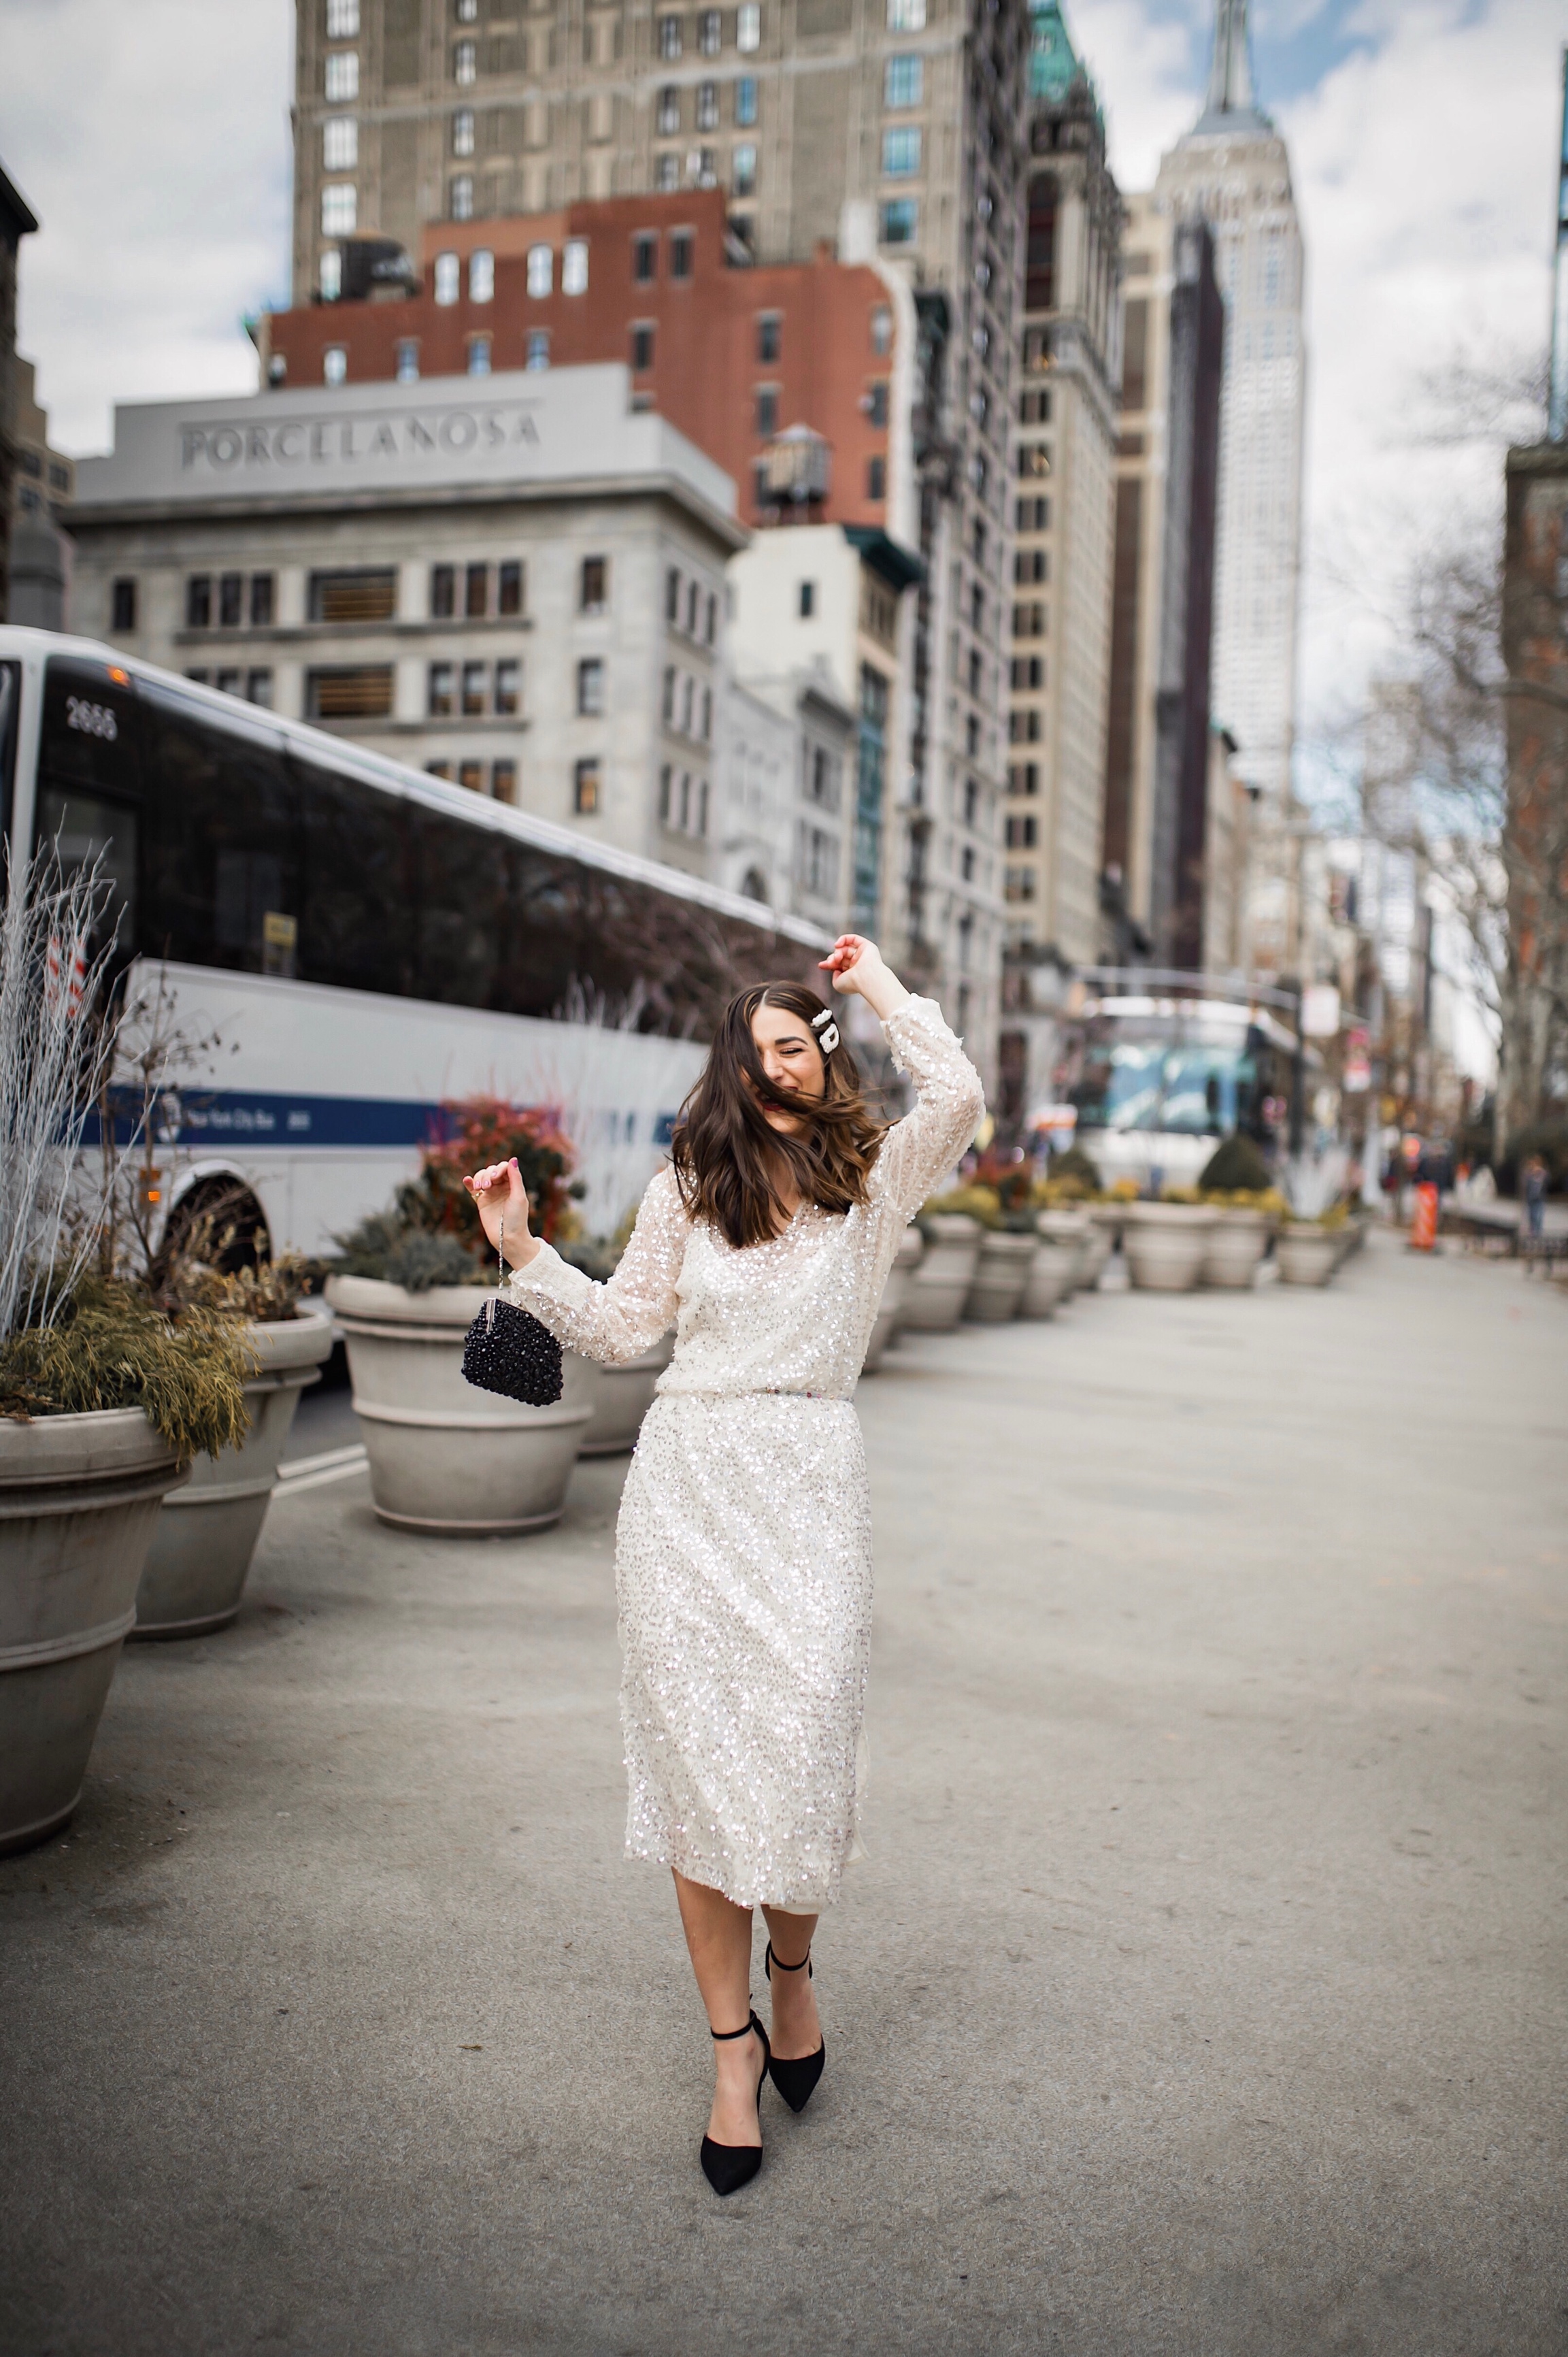 10 Ways To Be An Amazing Houseguest Sequined Midi Dress Black Heels Esther Santer Fashion Blog NYC Street Style Blogger Outfit OOTD Trendy  Shopping Girl What How To Wear Beaded Clutch Pearl Hair Clips Zara Asos Taxi Shot Photoshoot Inspo Bag Pretty.JPG